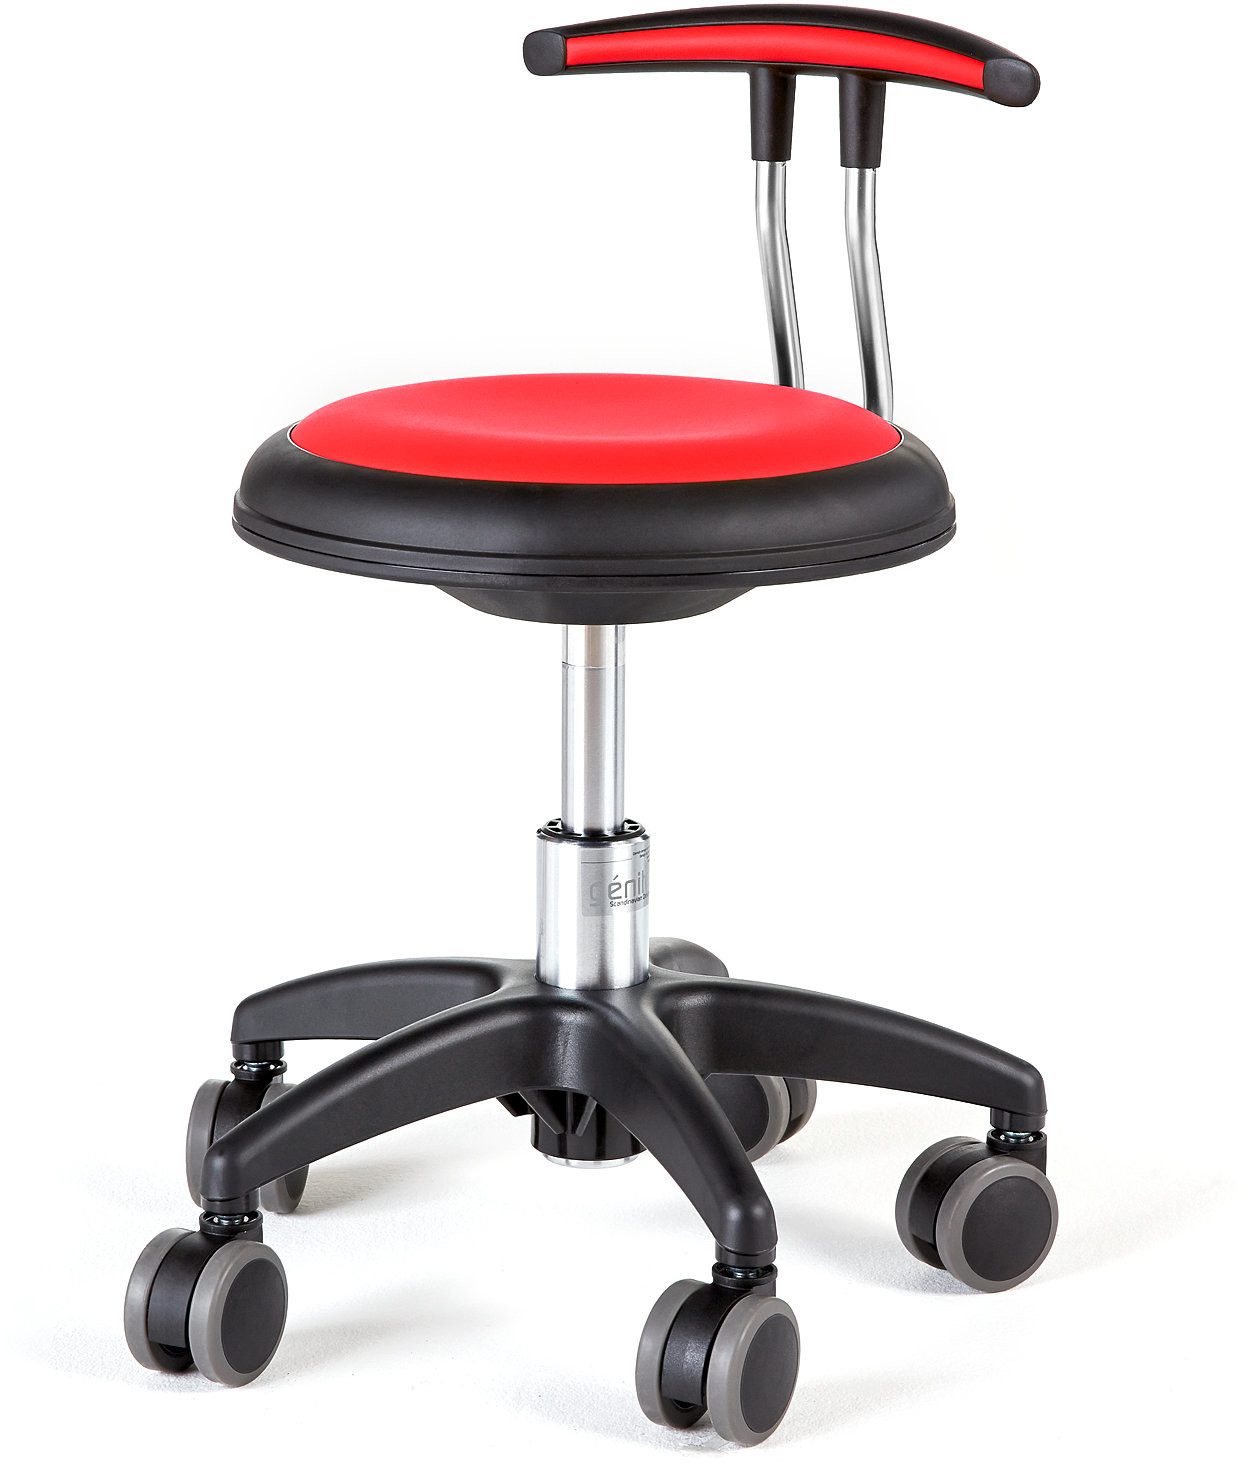 AJ Produkty e- Wheel stool Star seat height 300-380 mm. in red leather.